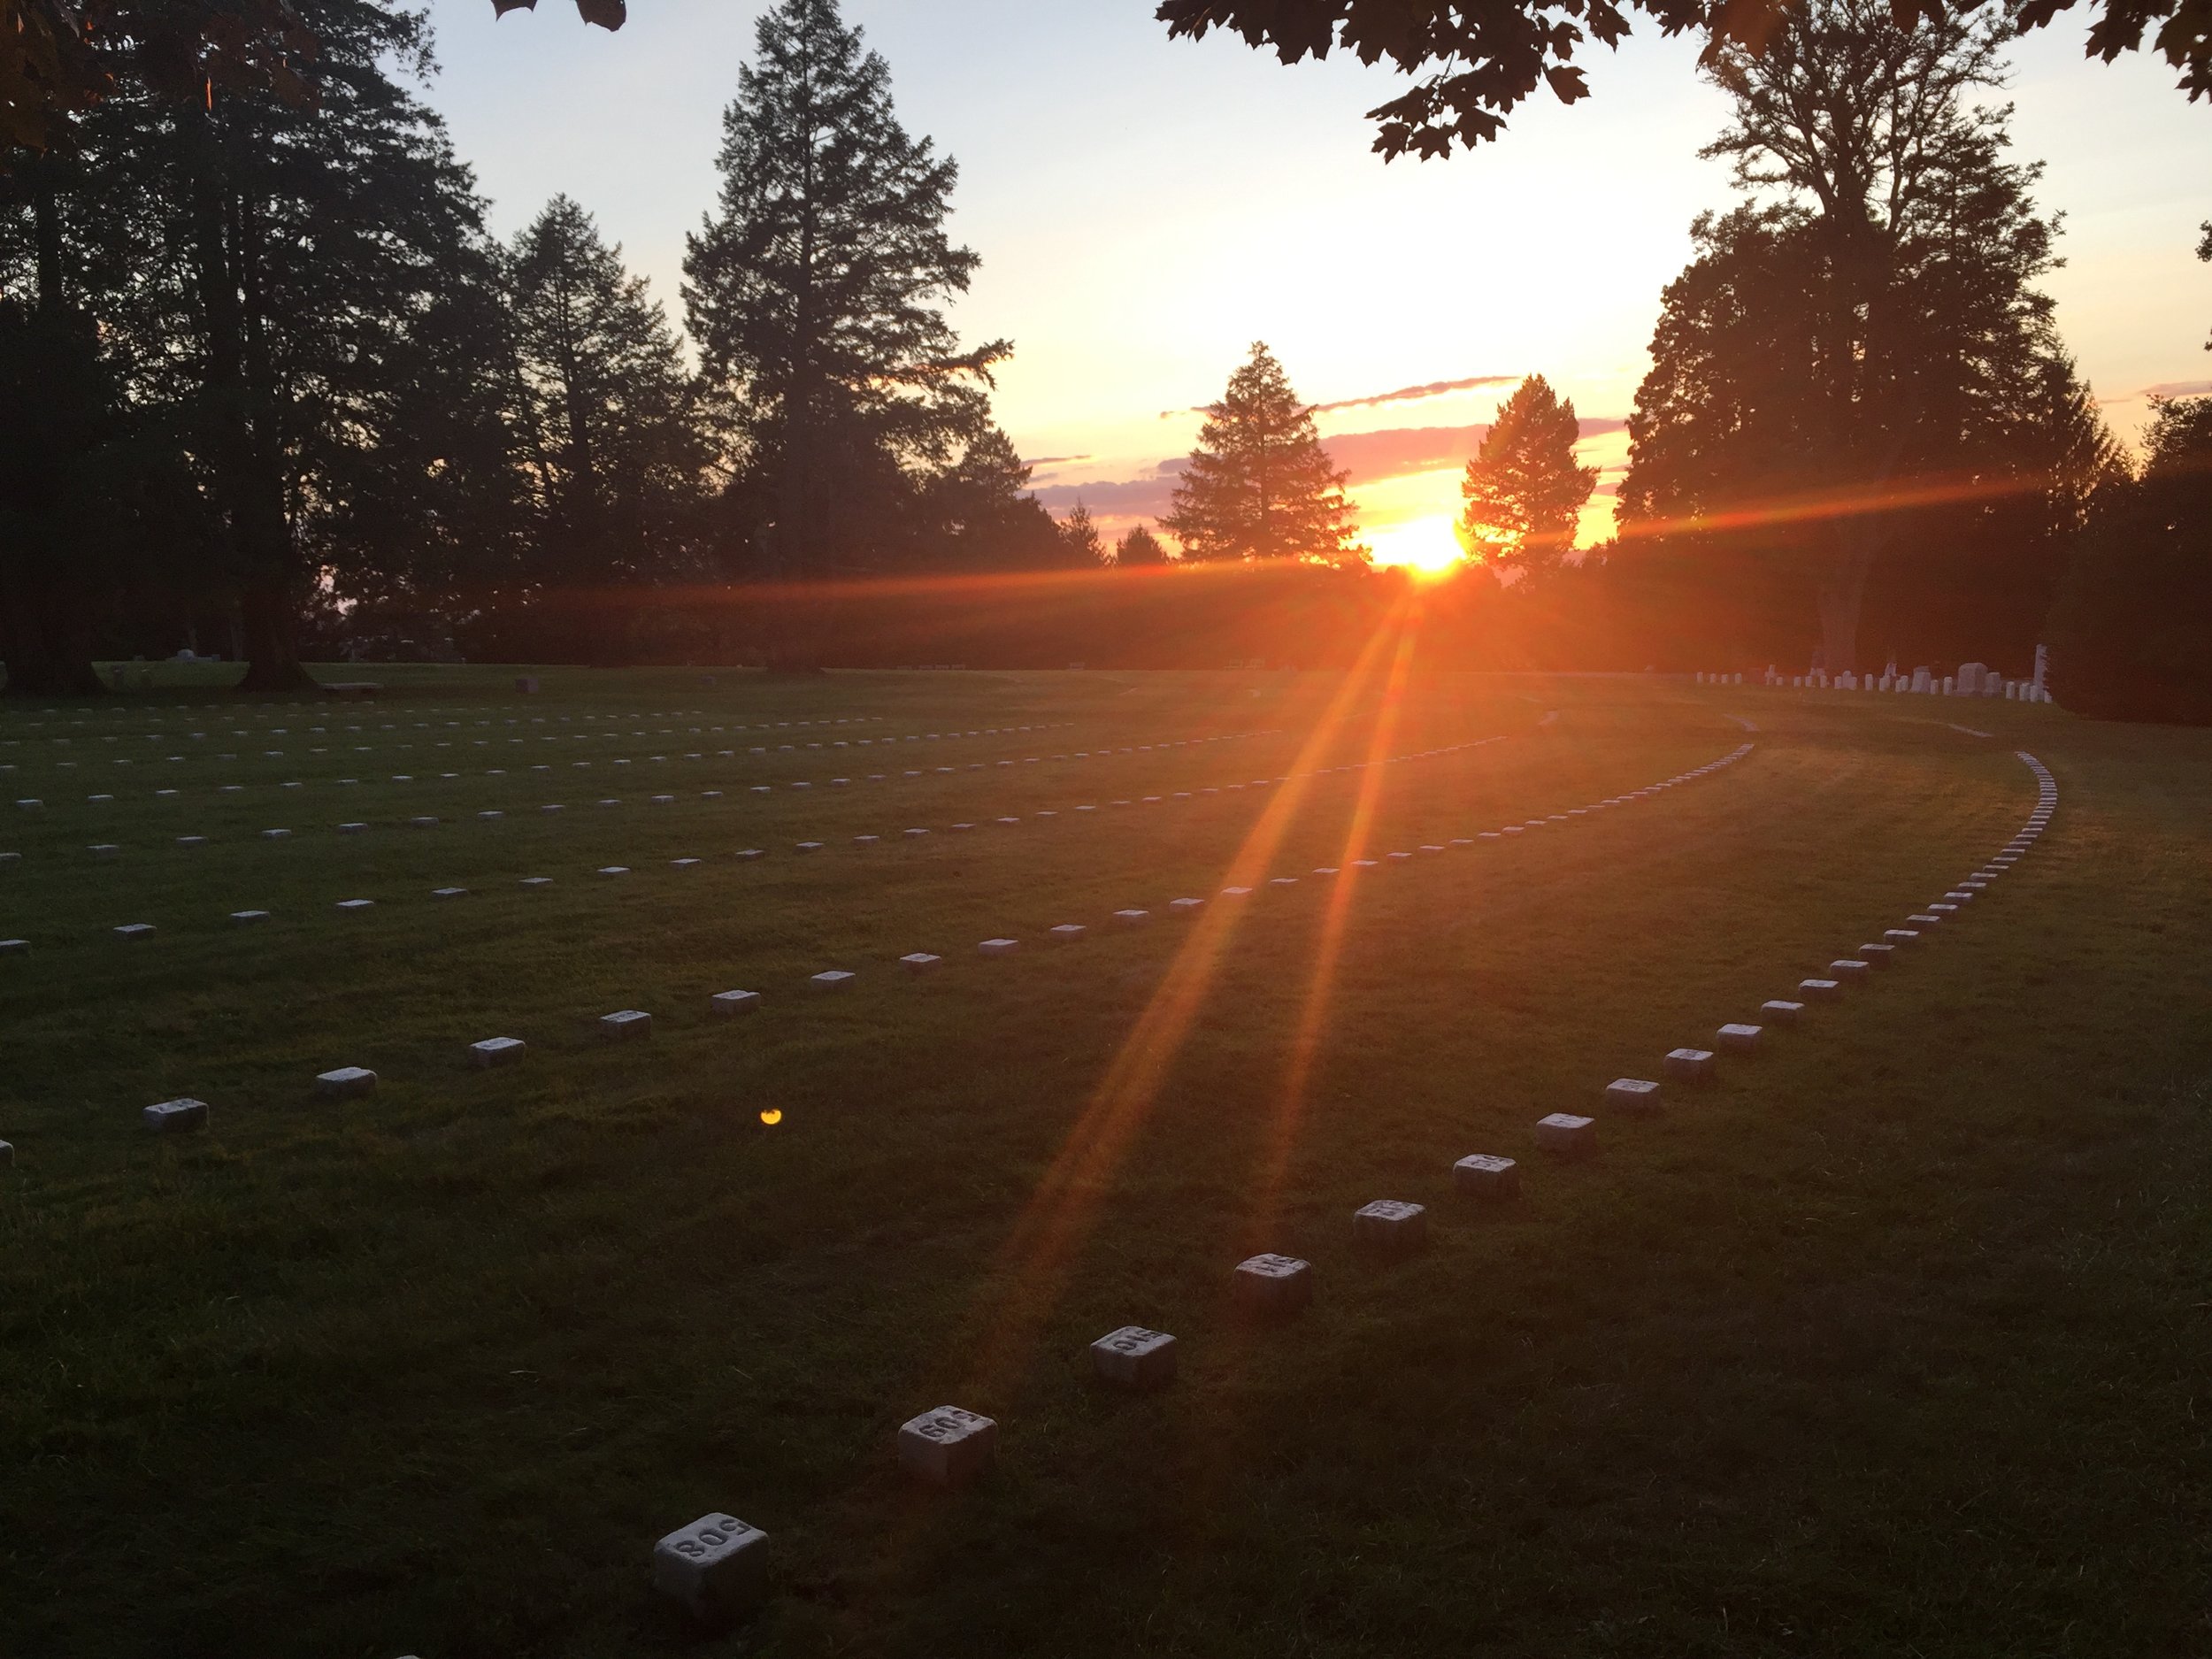  Sunset at the Soldiers' National Cemetery, from the spot where Lincoln delivered his address. 